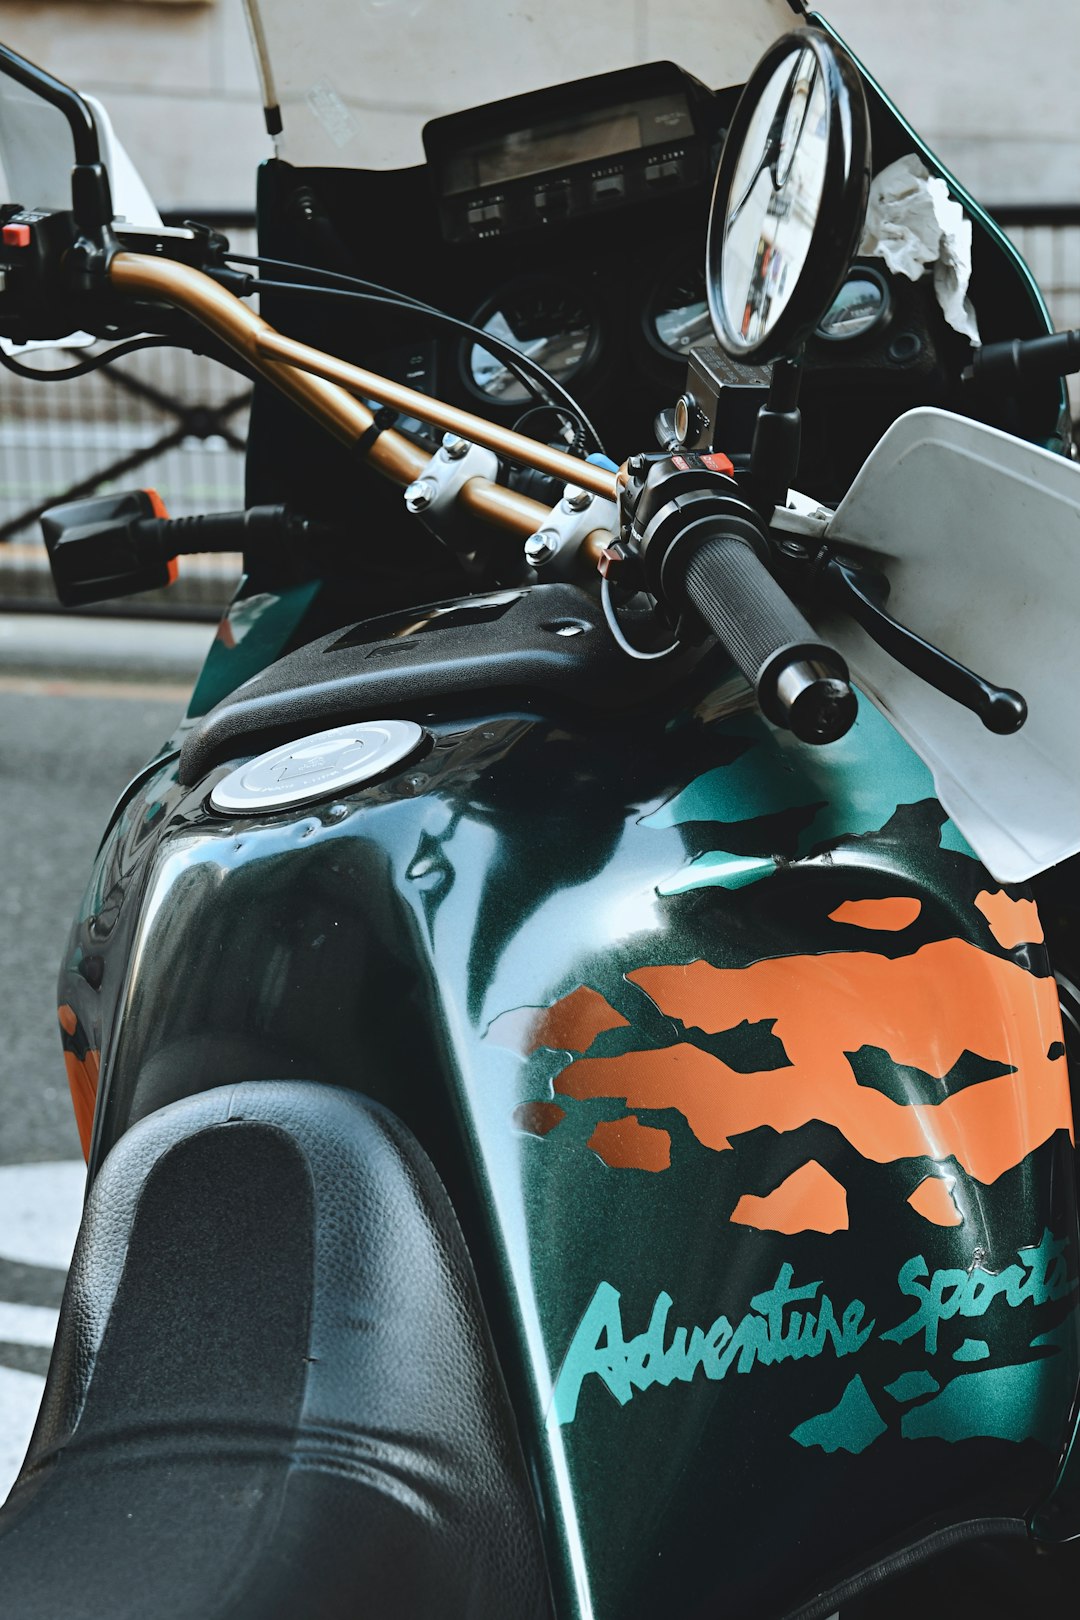 black motorcycle with white and green camouflage print